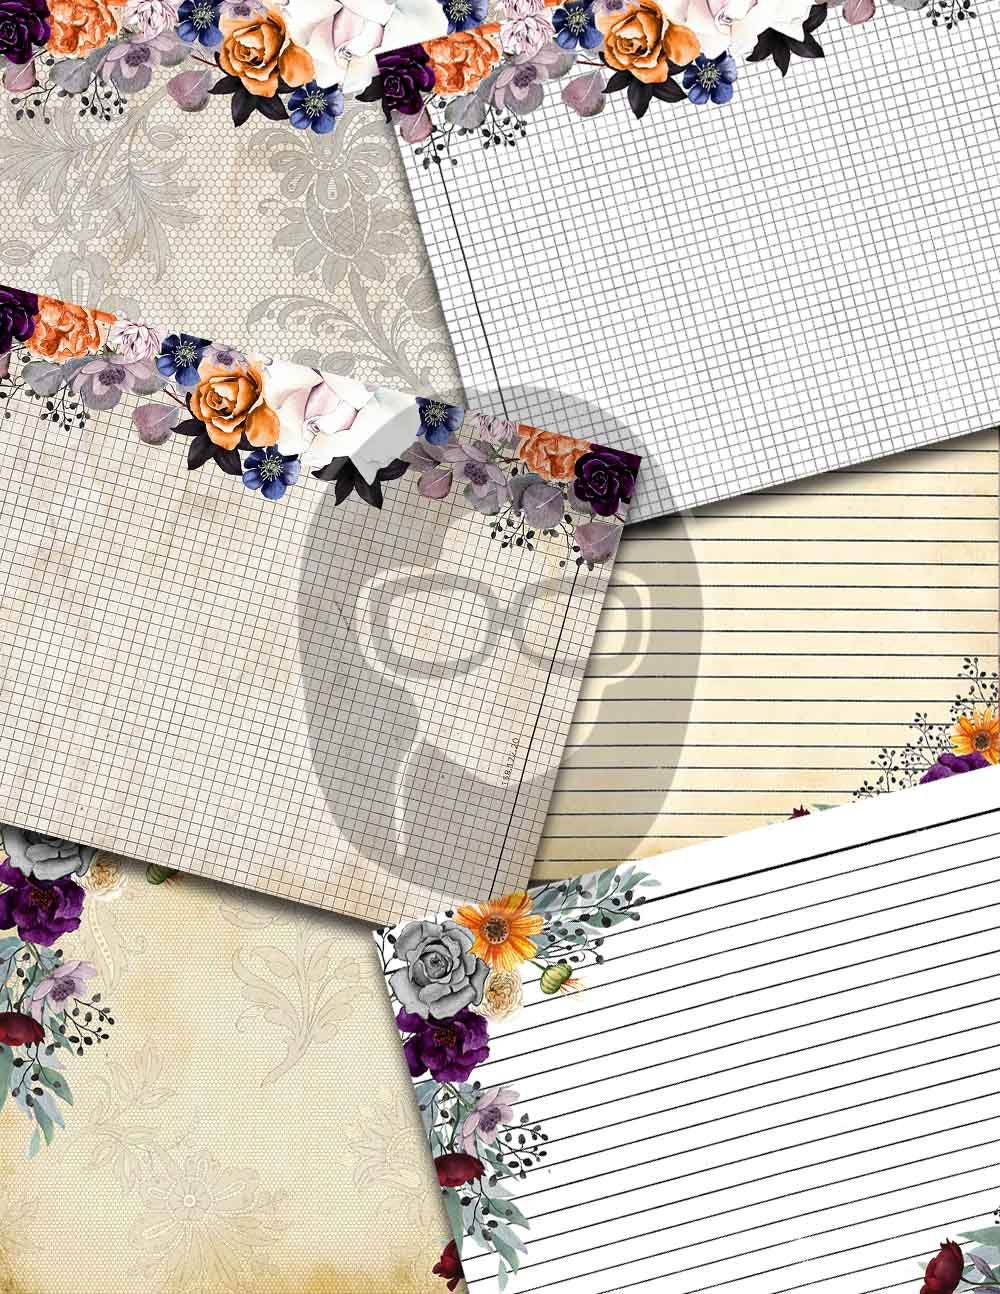 Halloween Digital Paper, Junk Journal Printable-36pg Instant Download- Witch Journal, Autumn Flowers, Lined Journal Pages, Gothic Lace Paper